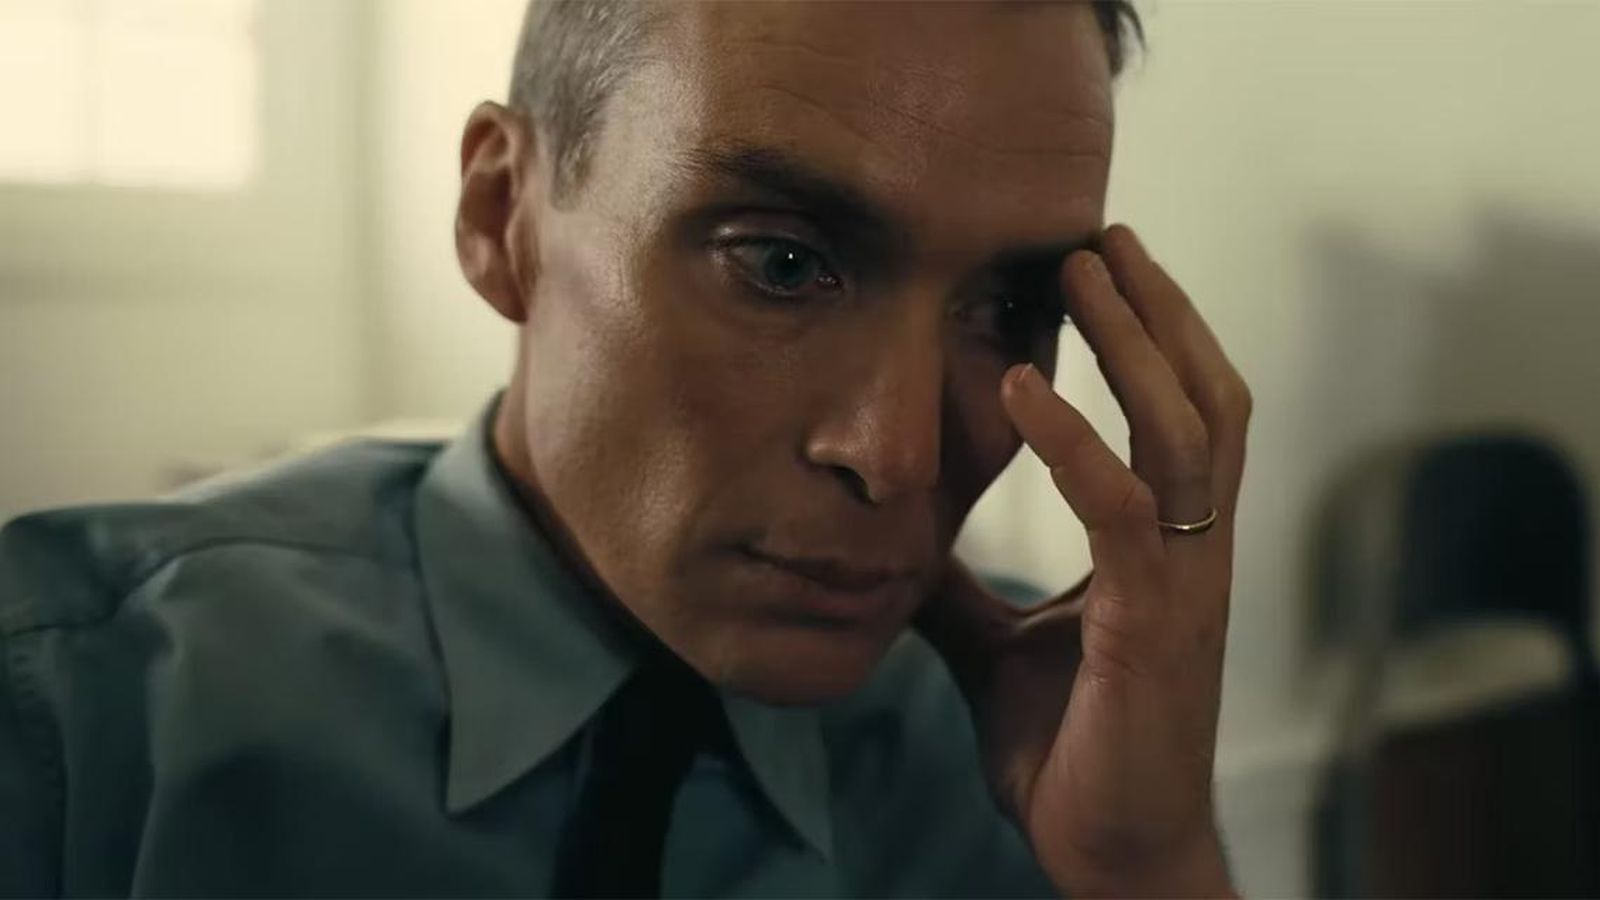 Oppenheimer topped 900 million to become the highest-grossing biopic of all time, surpassing Bohemian Rhapsody